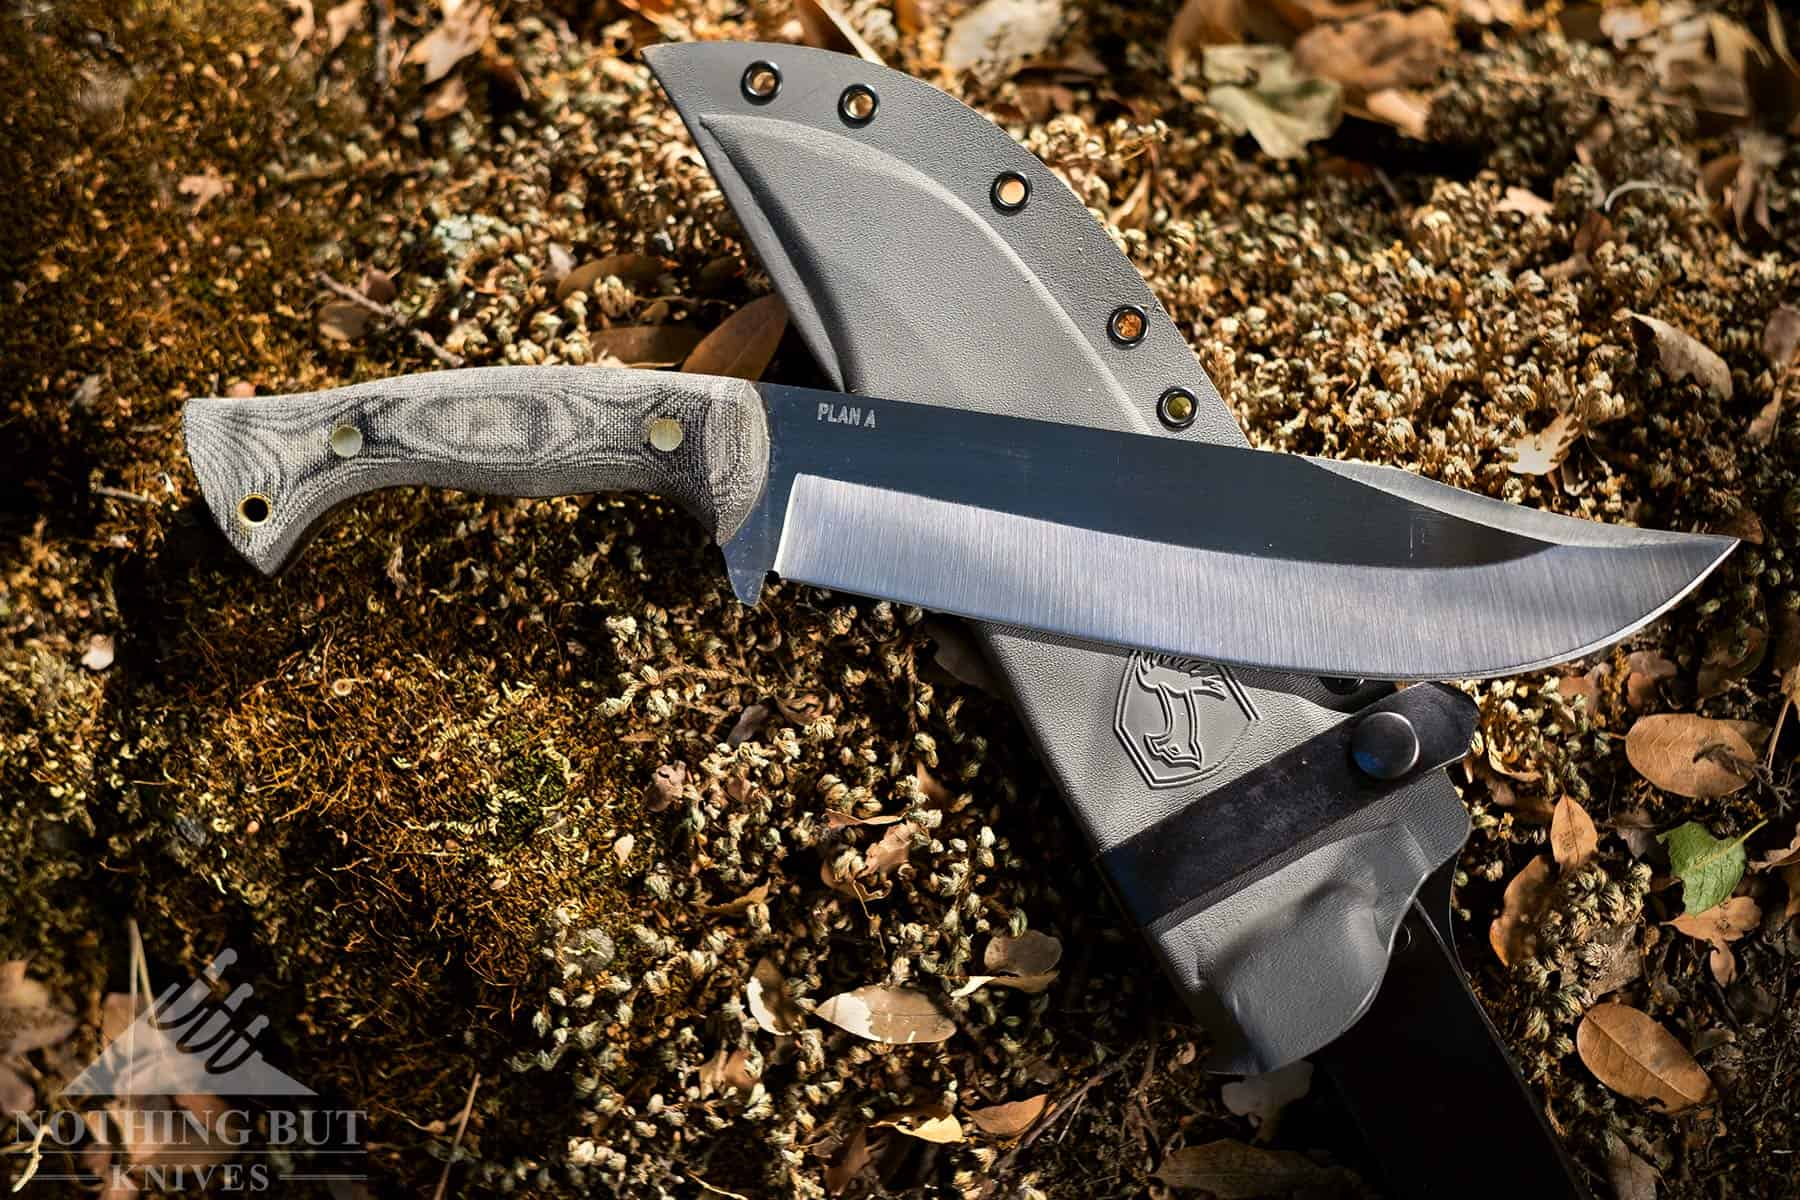 The Condor Plan A Bowie is a smaller alternative to the Work Tuff Gear Apex.